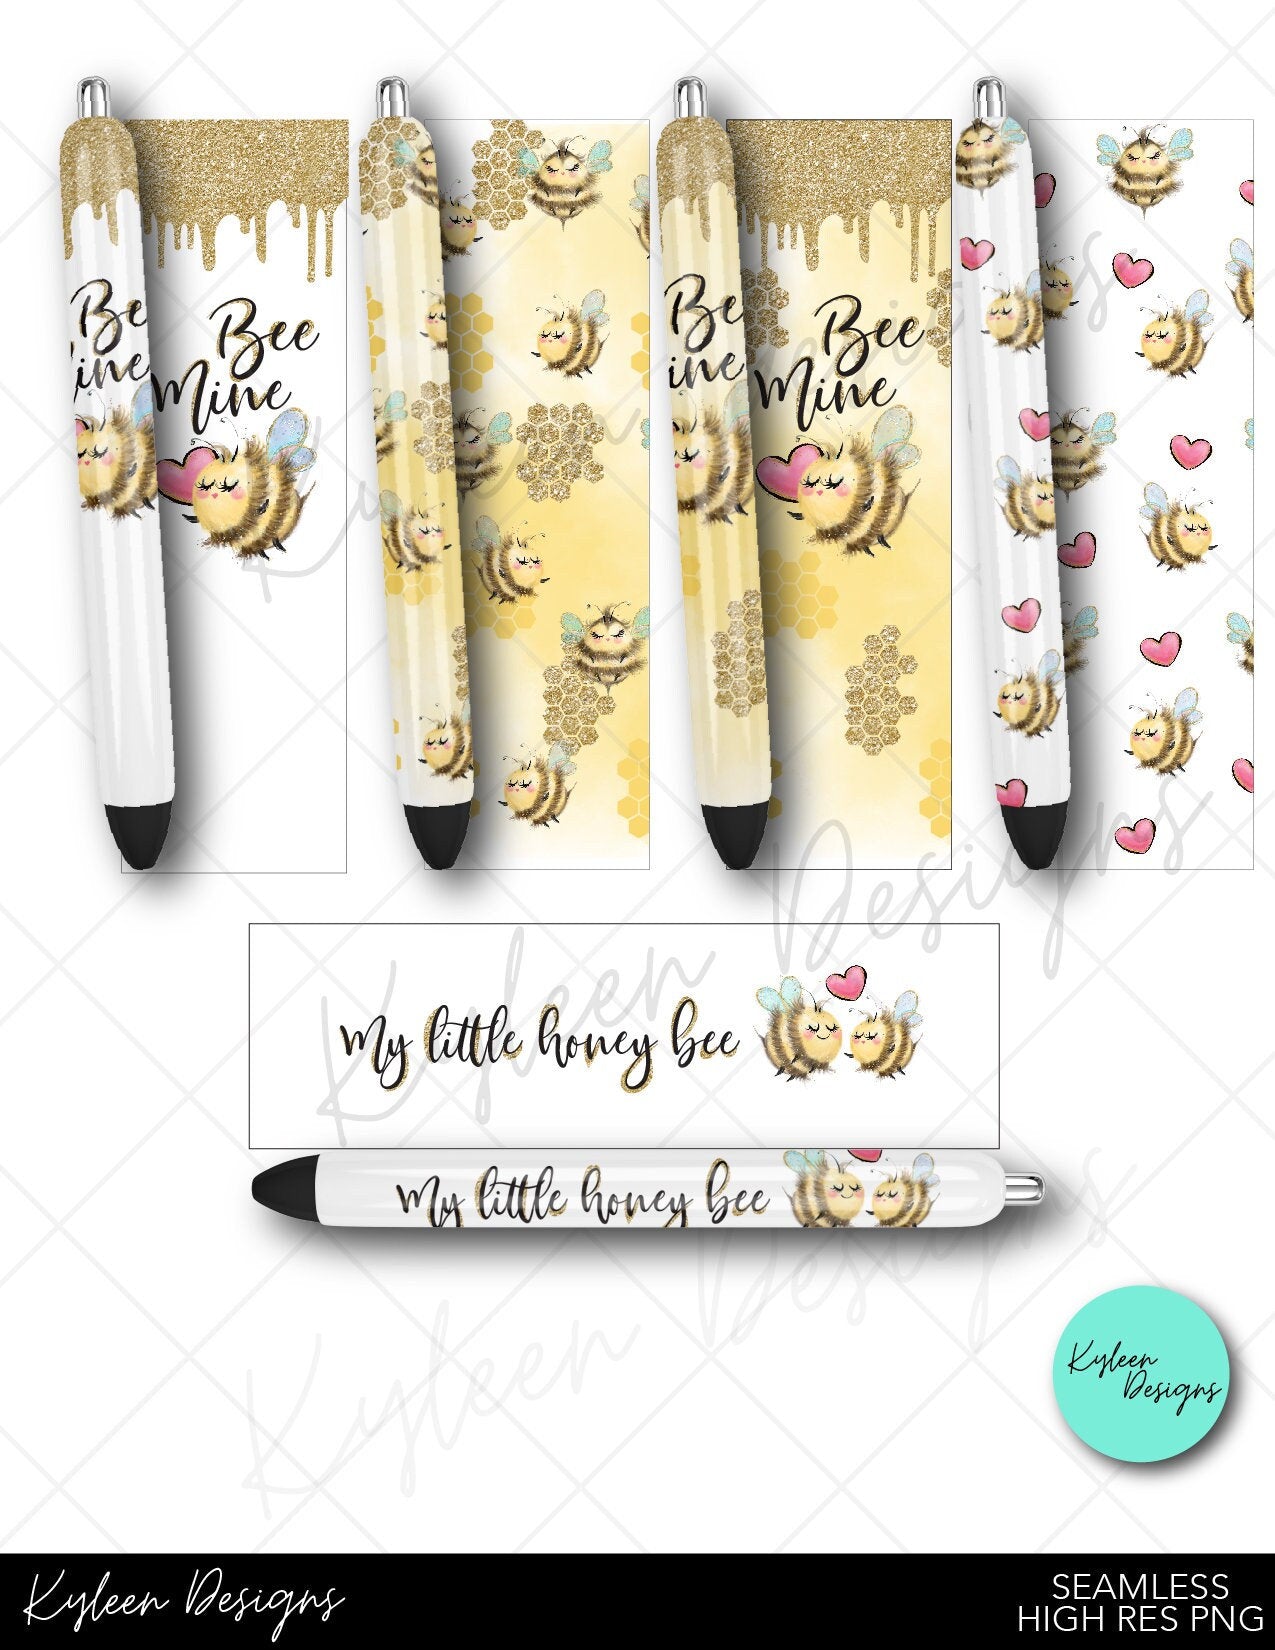 SEAMLESS Bee mine honey bee Valentine pen wraps for waterslide high RES PNG